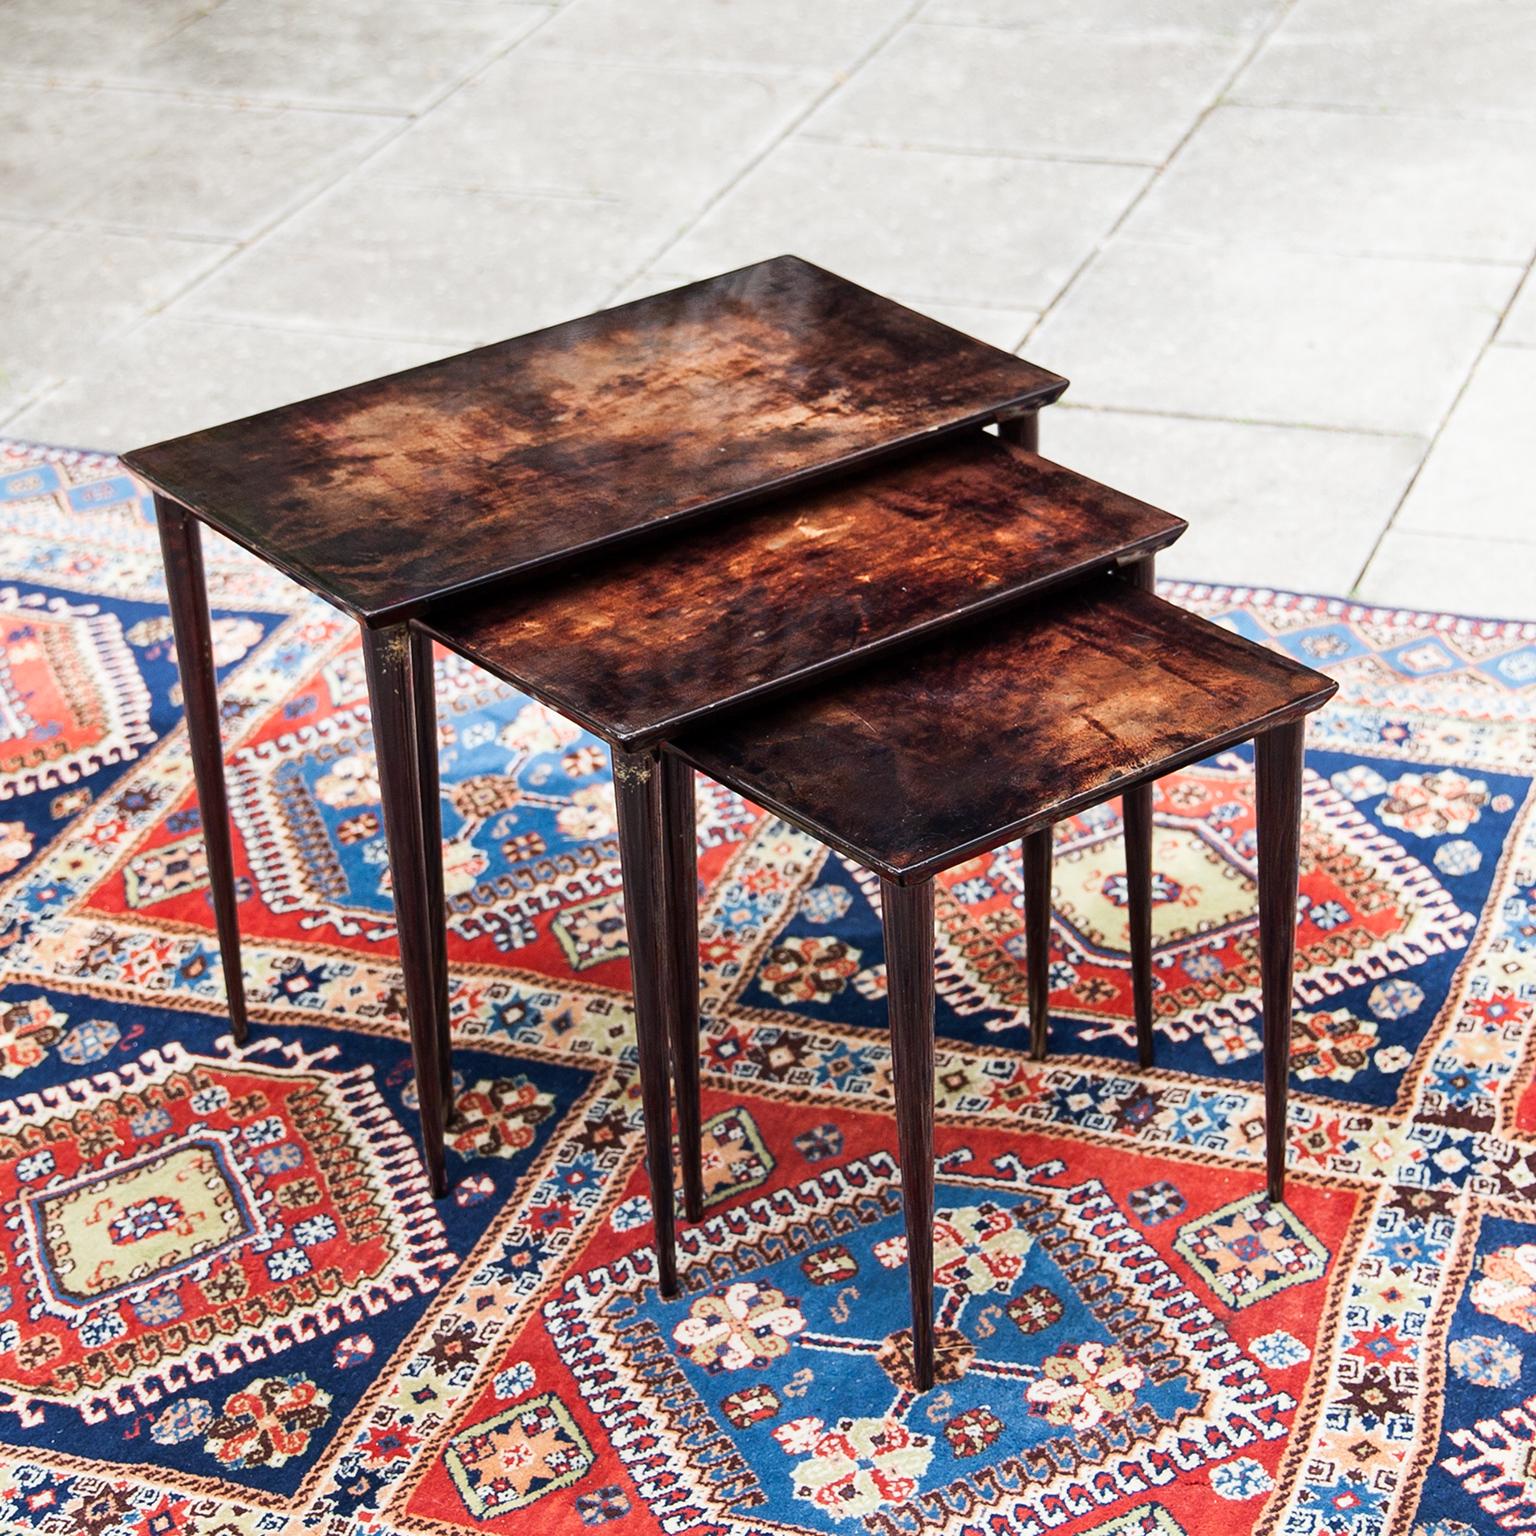 Nesting tables made by Aldo Tura in brown lacquered goatskin and executed circa 1970s with mahogany tained beech wood legs, in excellent condition. The price includes the set of three.
Along with artists like Piero Fornasetti and Carlo Bugatti, Aldo